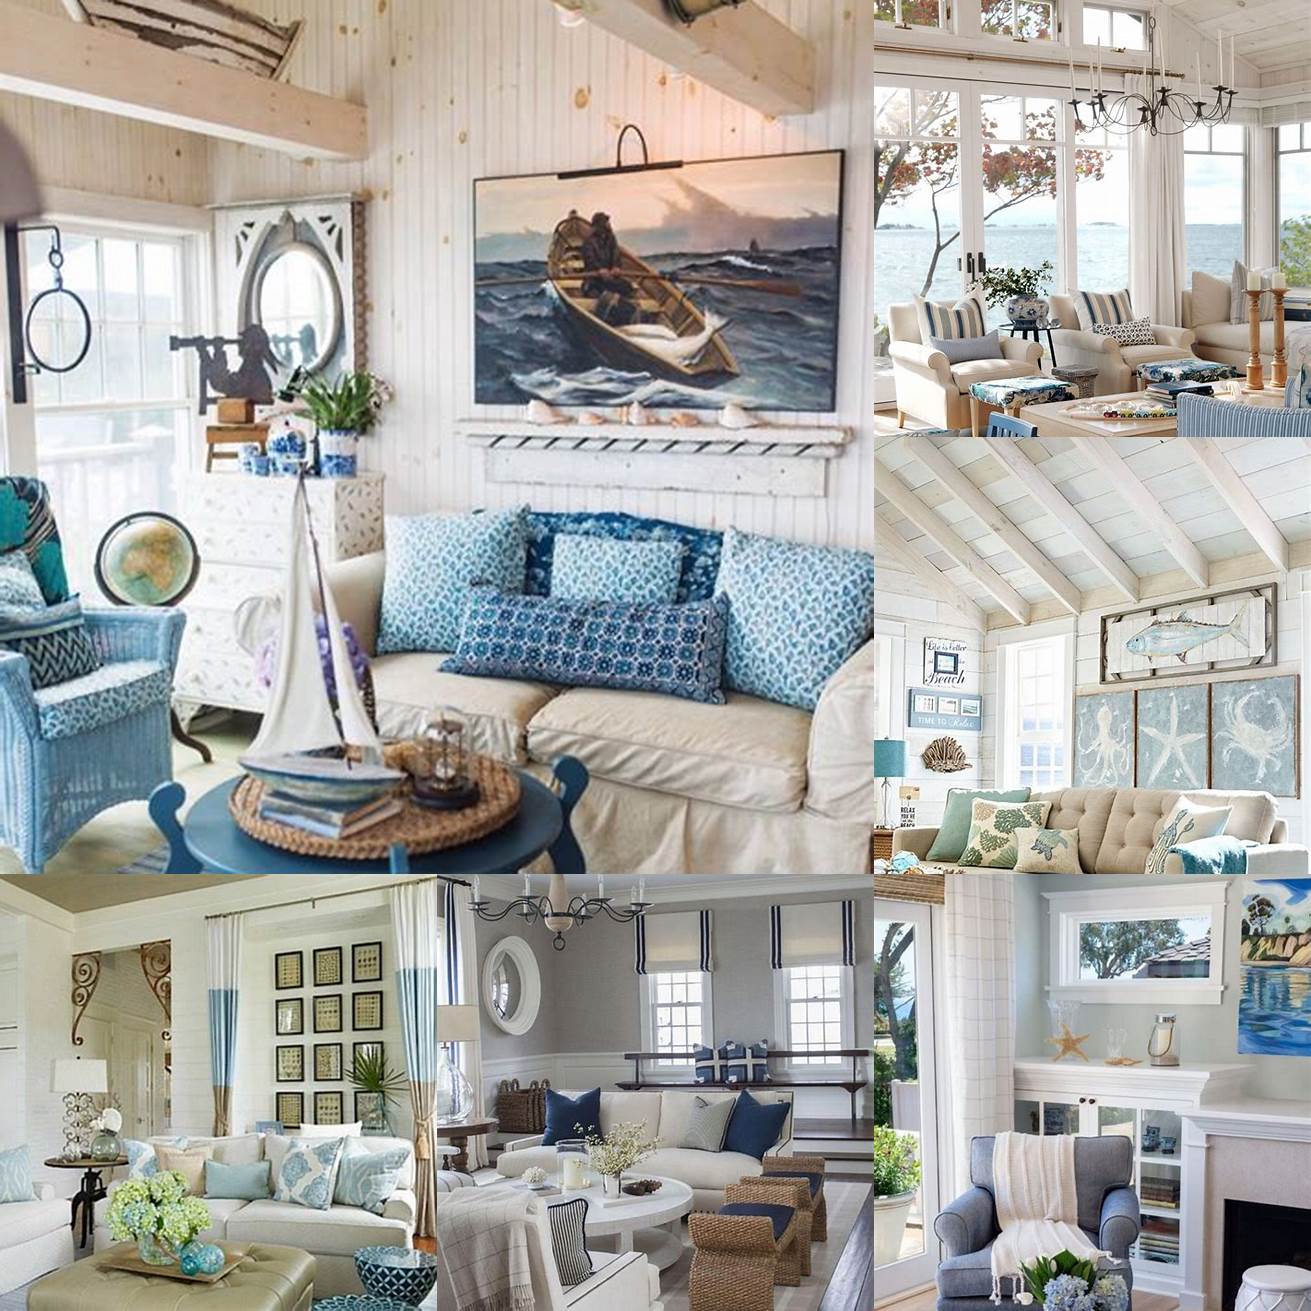 Nautical decor may not work well with more traditional or modern decor styles